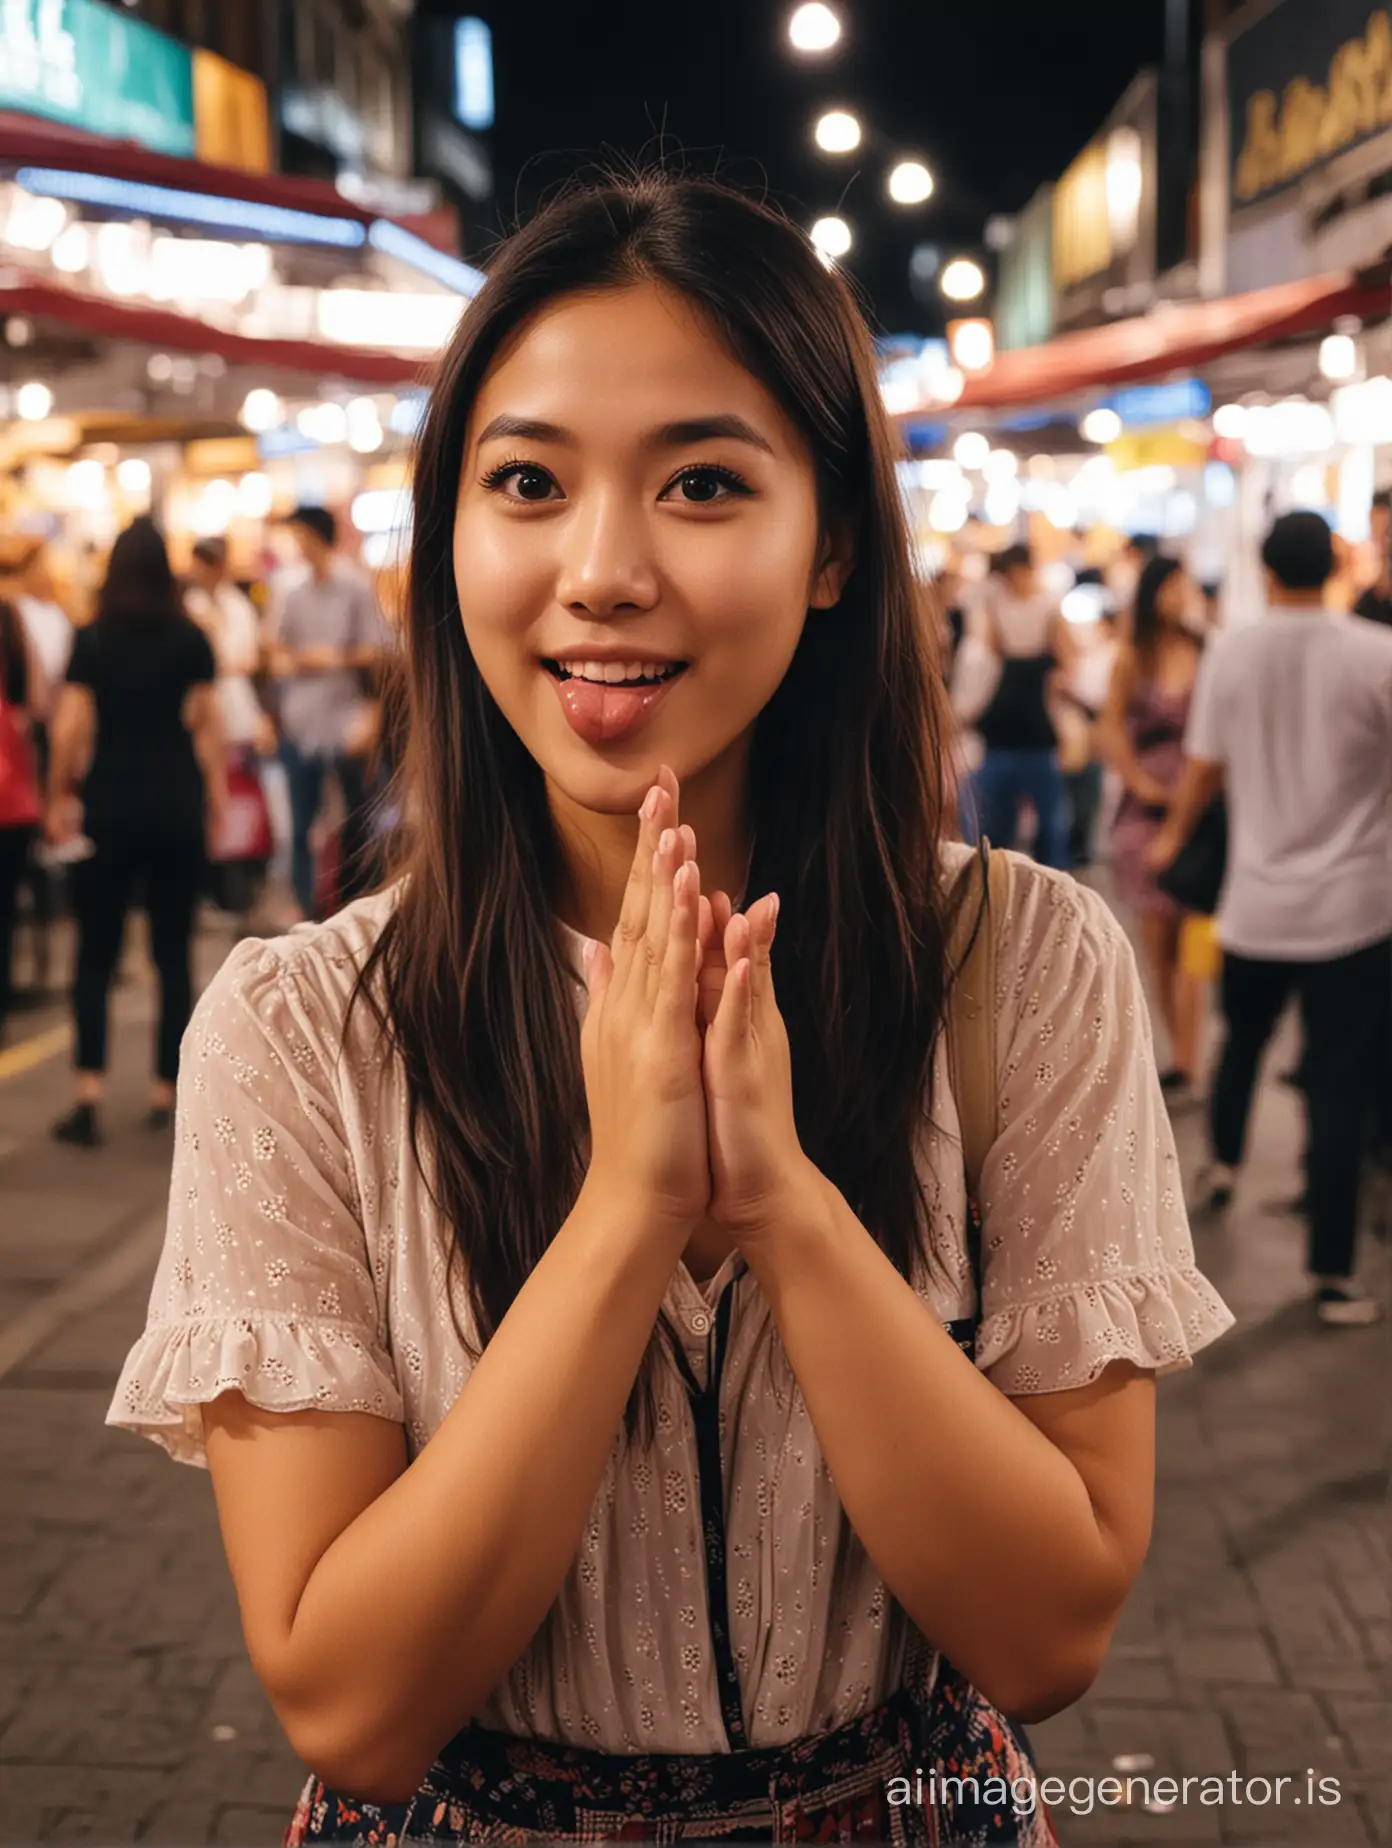 cute beautyful malaysian girl give a flying kiss at busking in night market downton